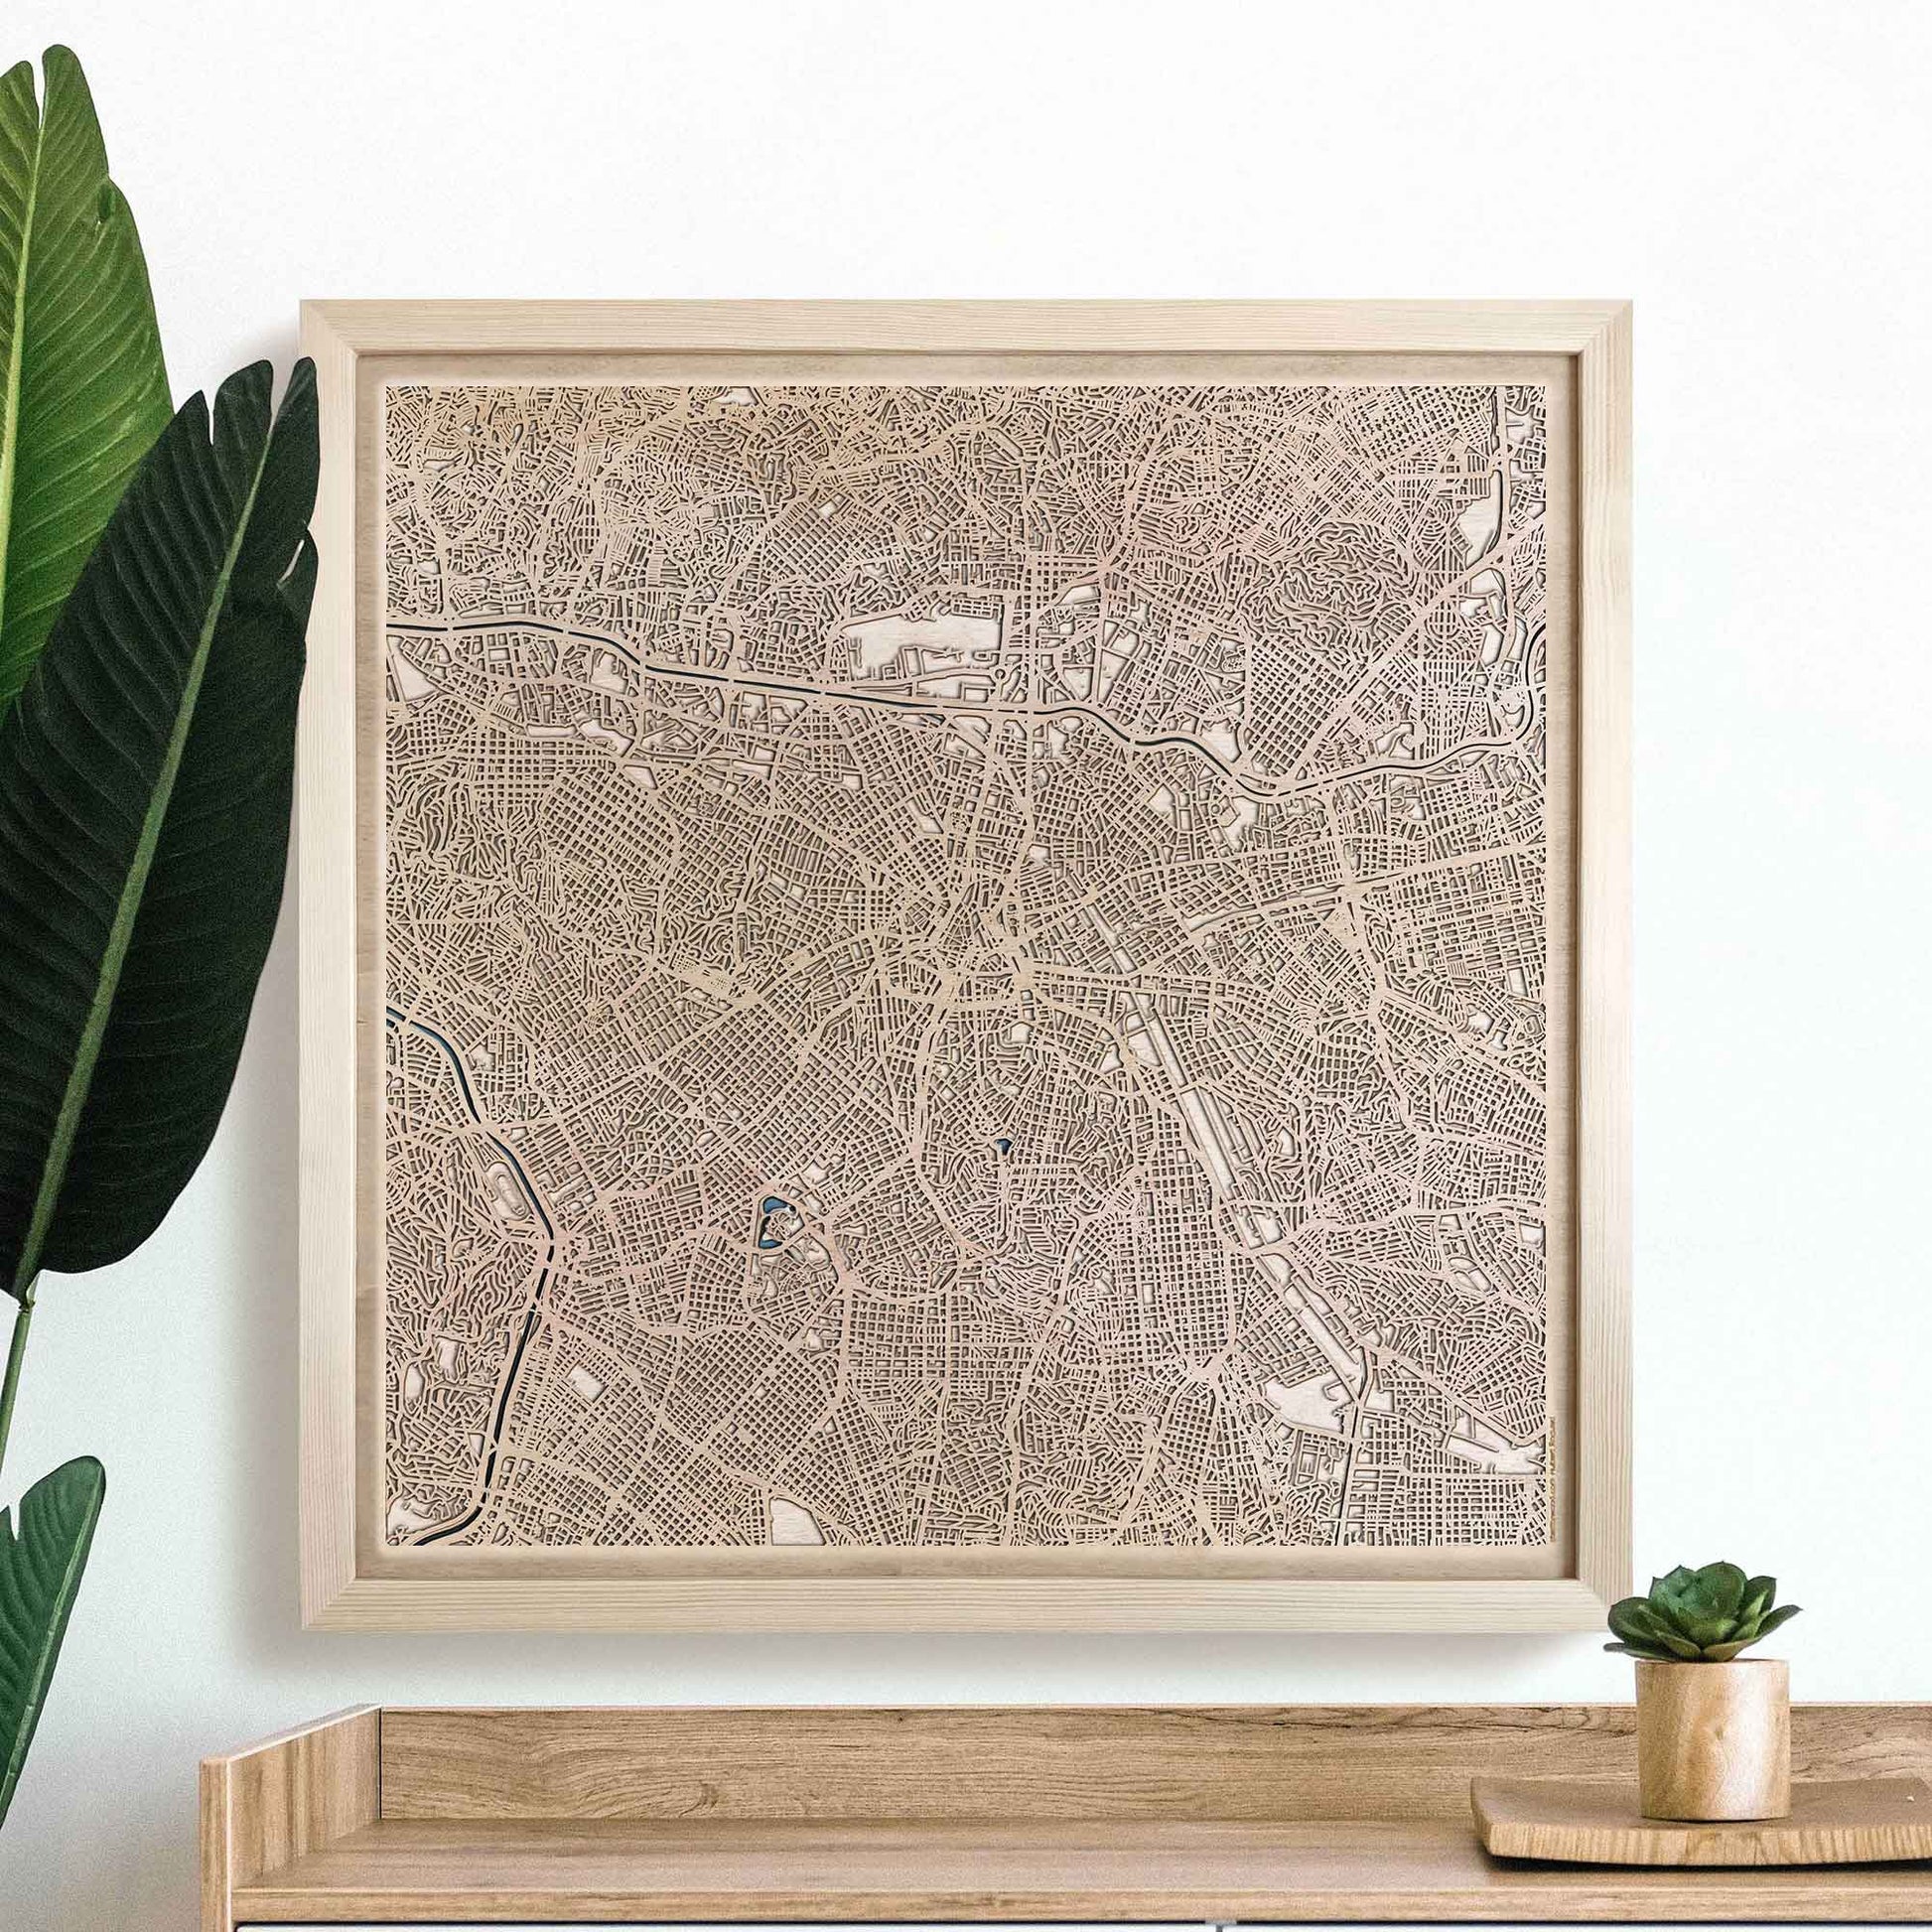 Sao Paulo Wooden Map by CityWood - Custom Wood Map Art - Unique Laser Cut Engraved - Anniversary Gift